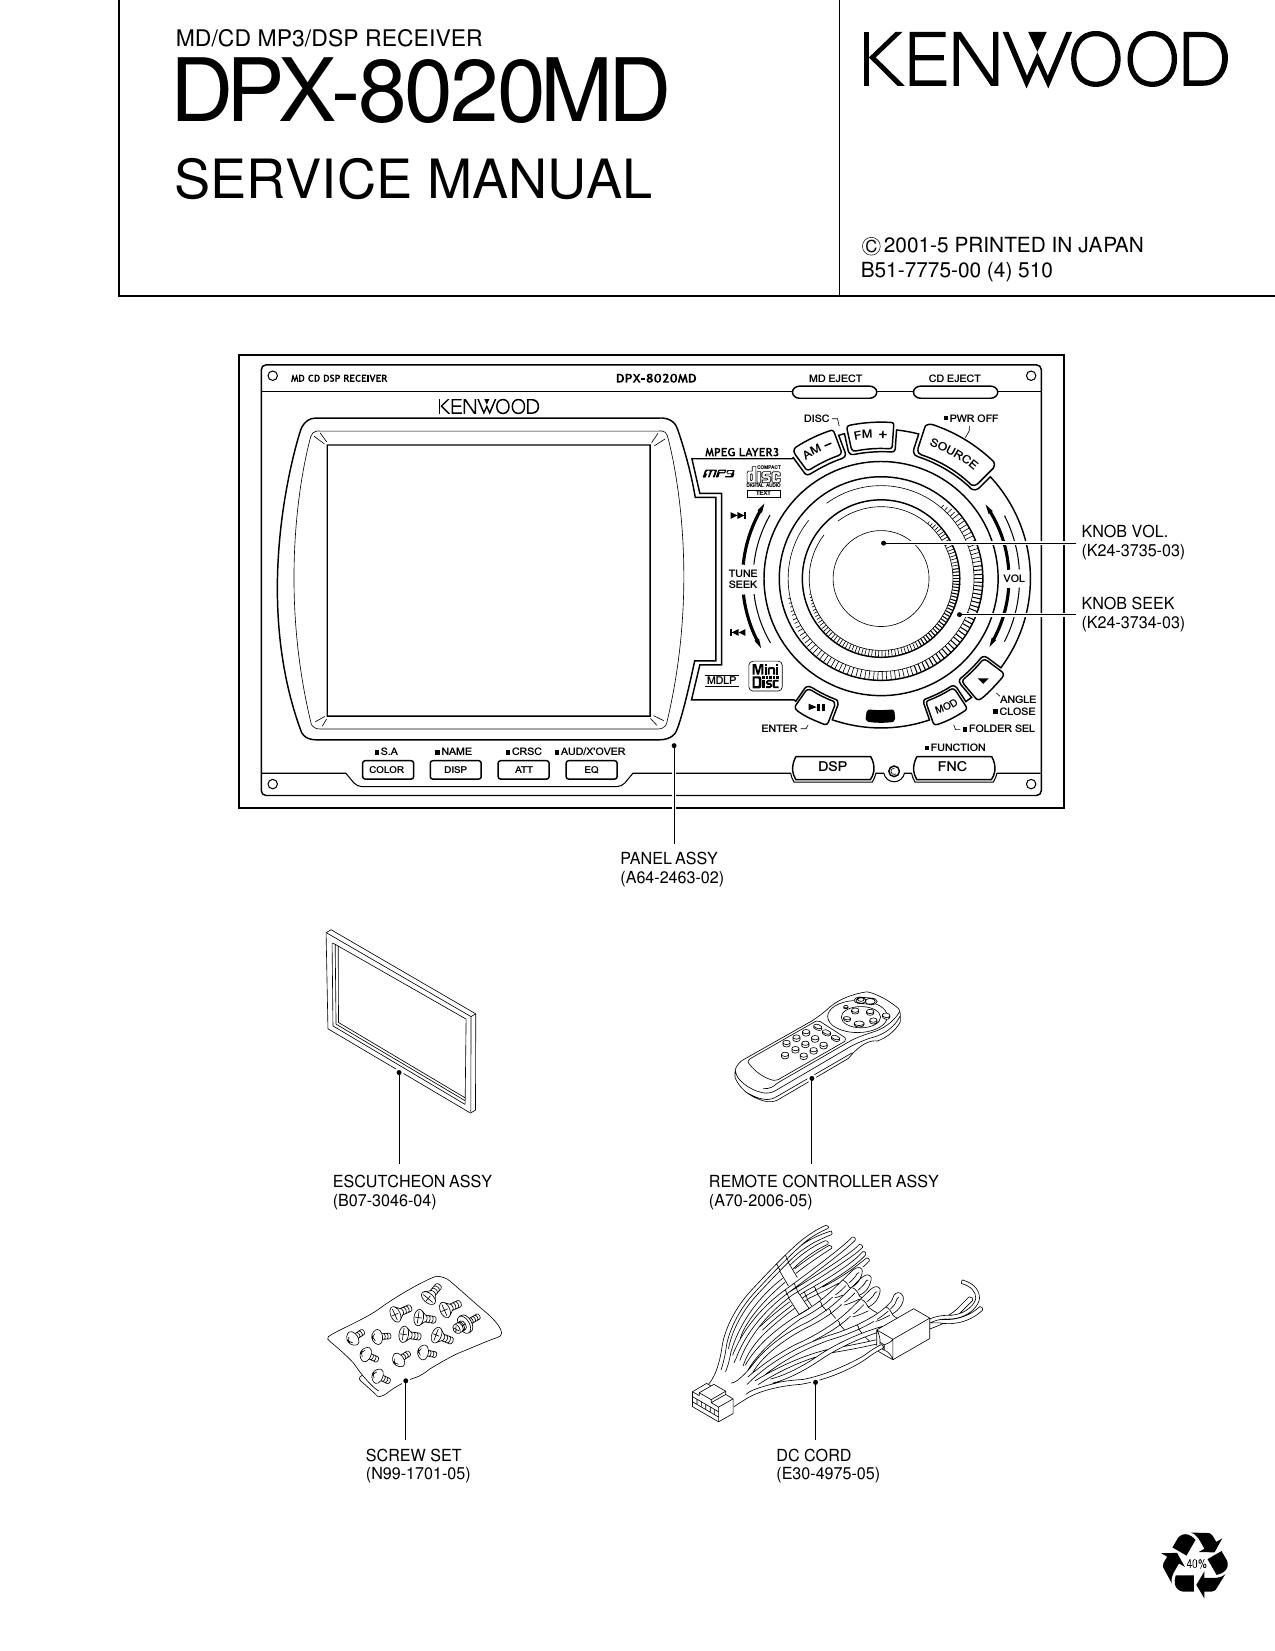 Kenwood DPX 8020 MD Service Manual